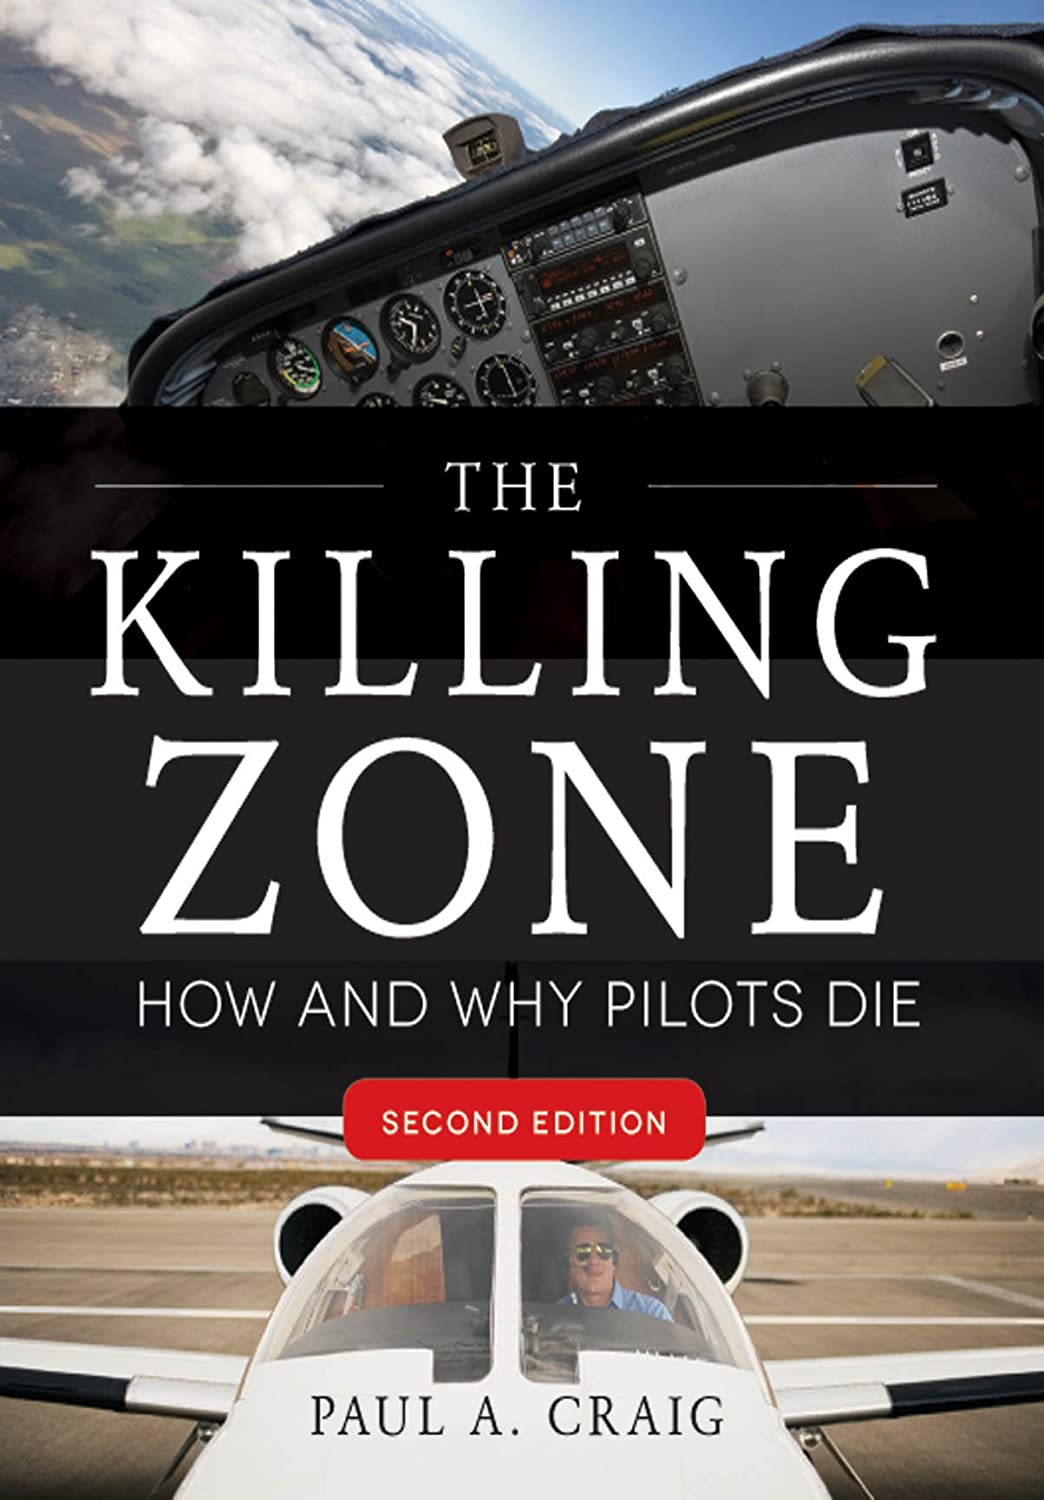 The Killing Zone "How and Why Pilots Die" Second Edition - by Paul A. Craig